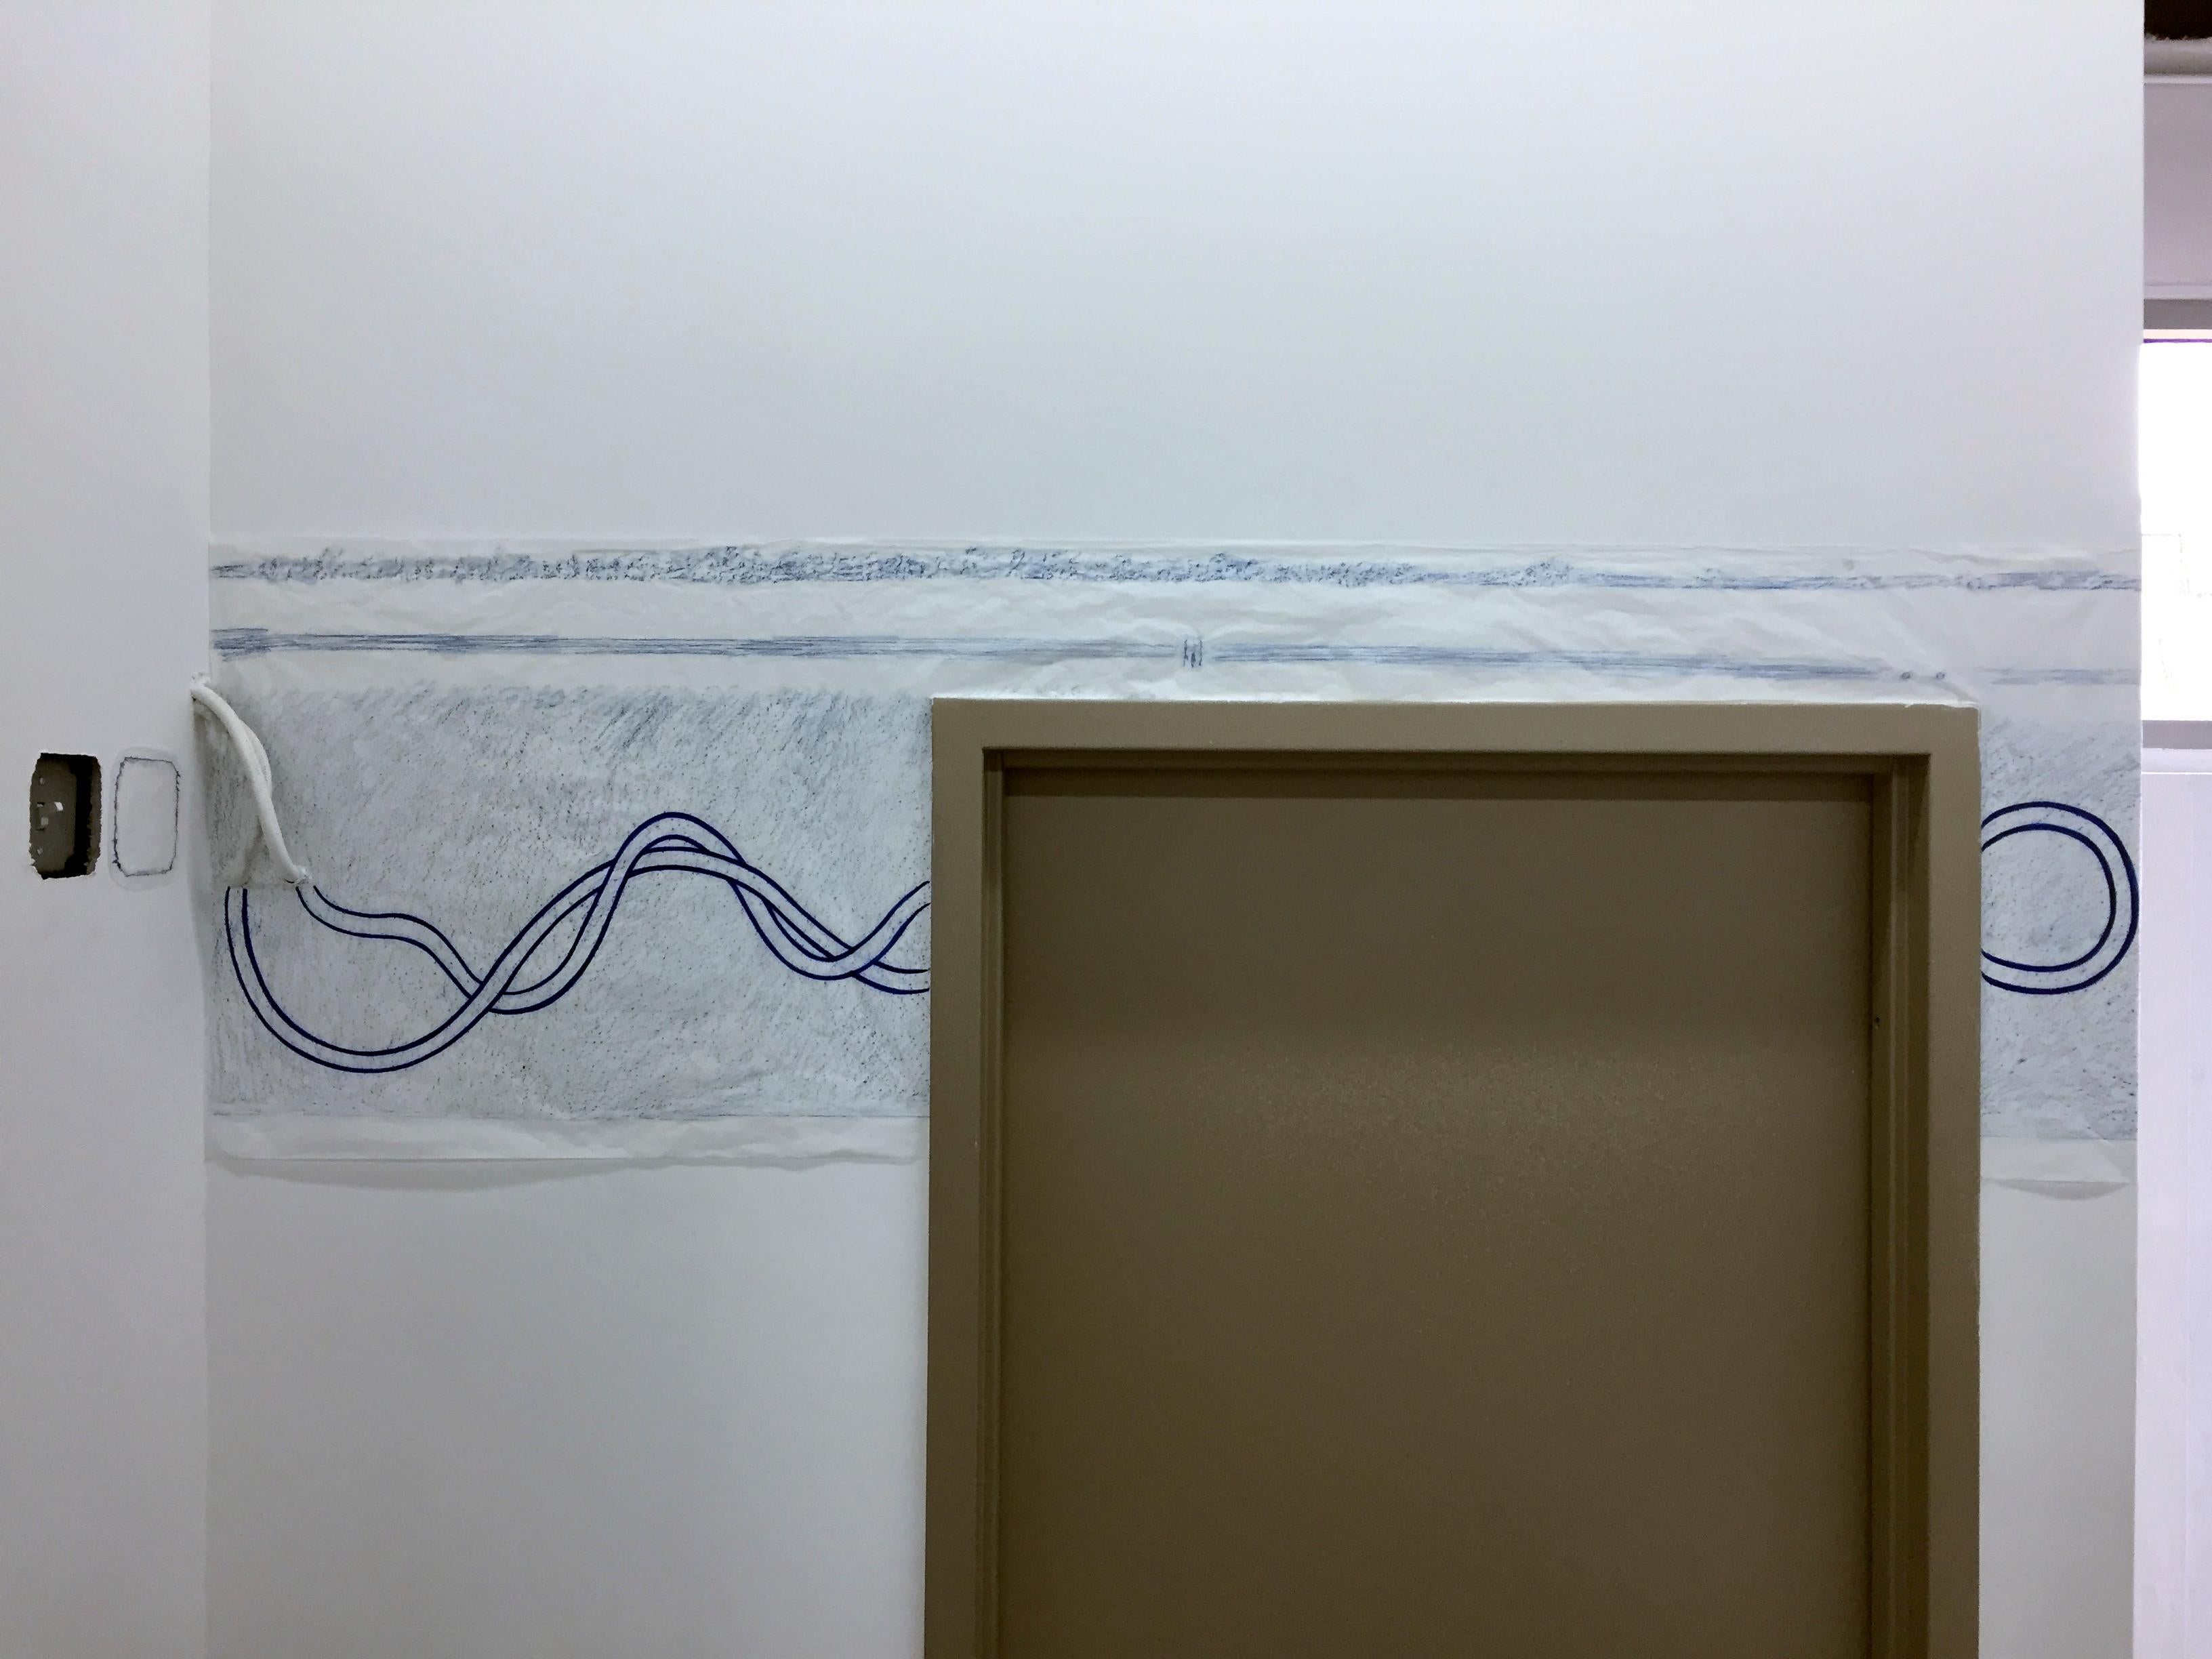 Deanna Lee, Surface Transcriptions, 2019, site responsive drawings at ODETTA 14